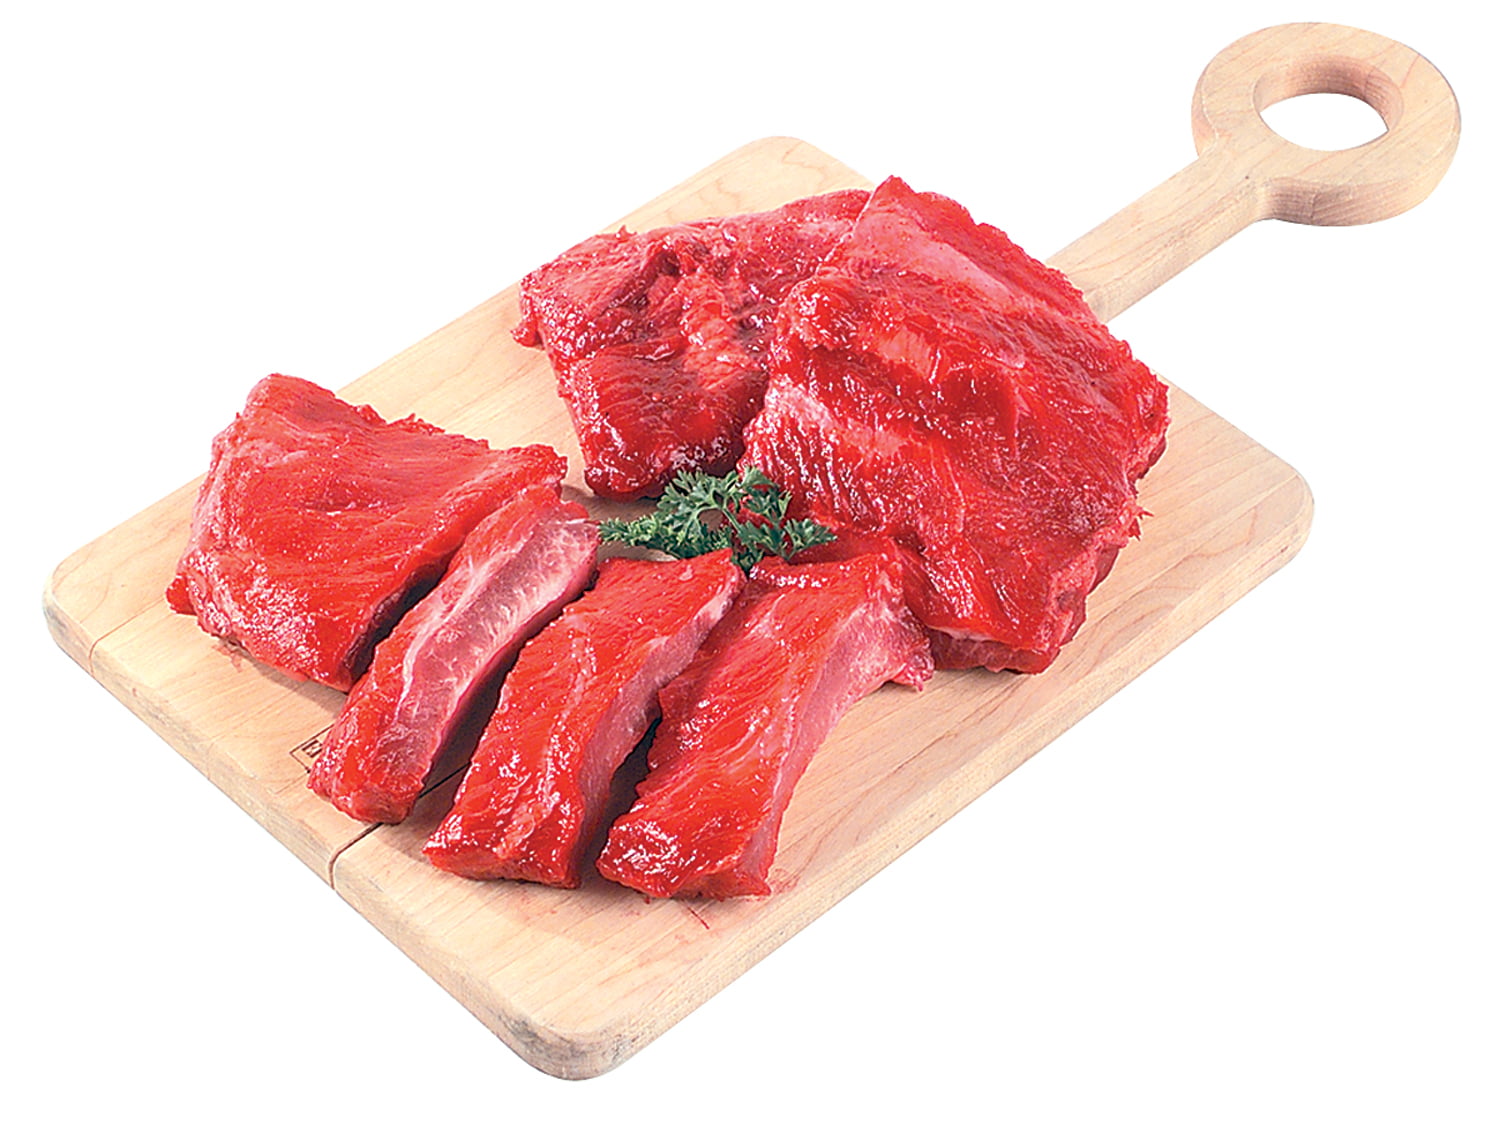 Red Raw Pork Ribs Food Picture